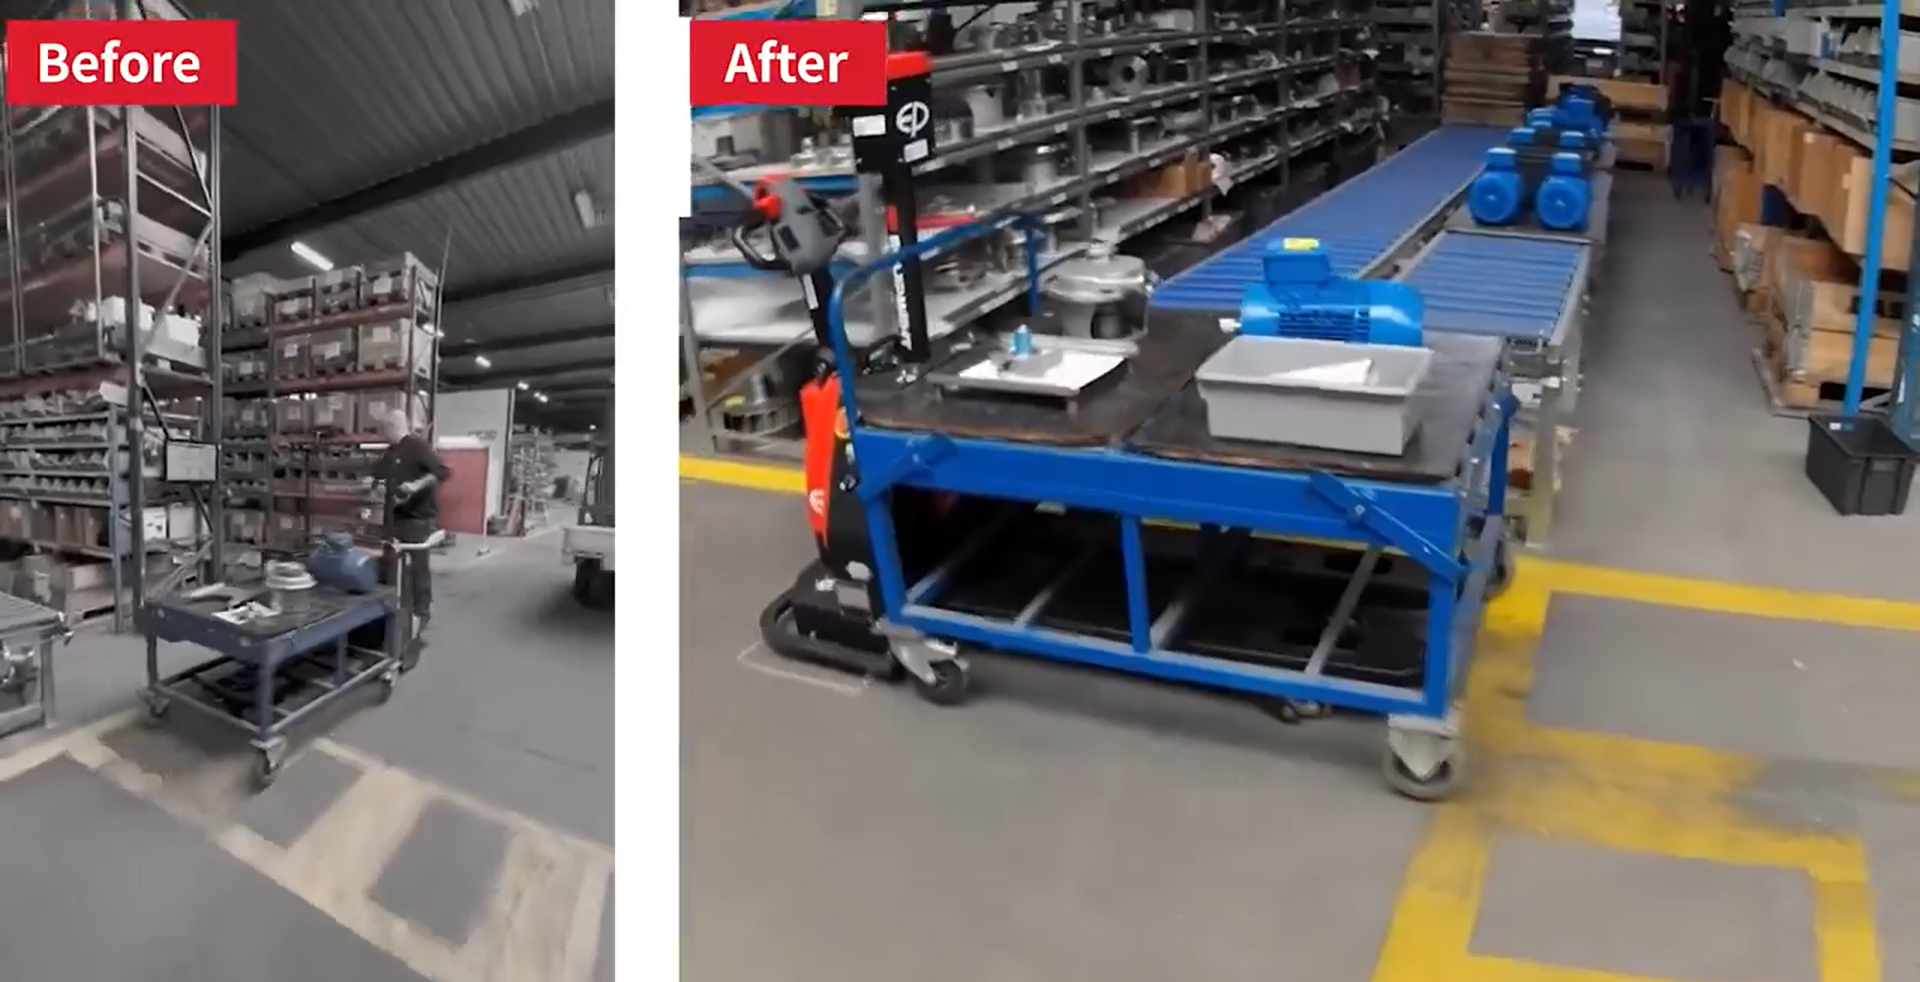 Before and after EP's AMR XP15 automated warehouse operations in Packo Inox Ltd.